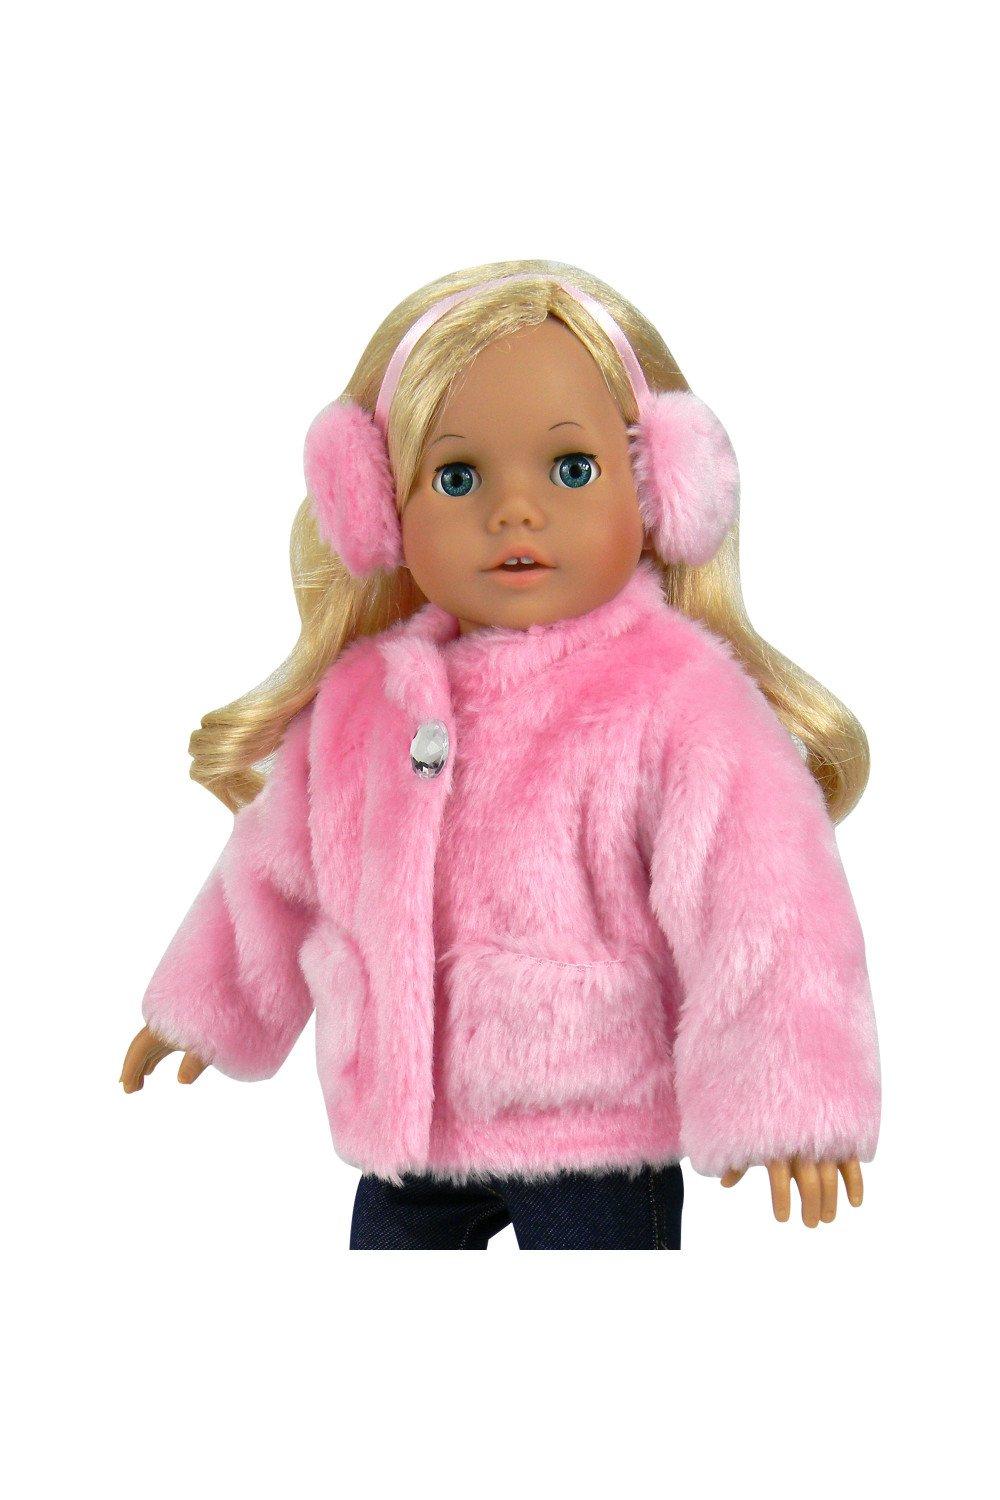 Sophia’s 2 Piece 18" Baby Doll Pink Fur Coat & Earmuffs Outfit